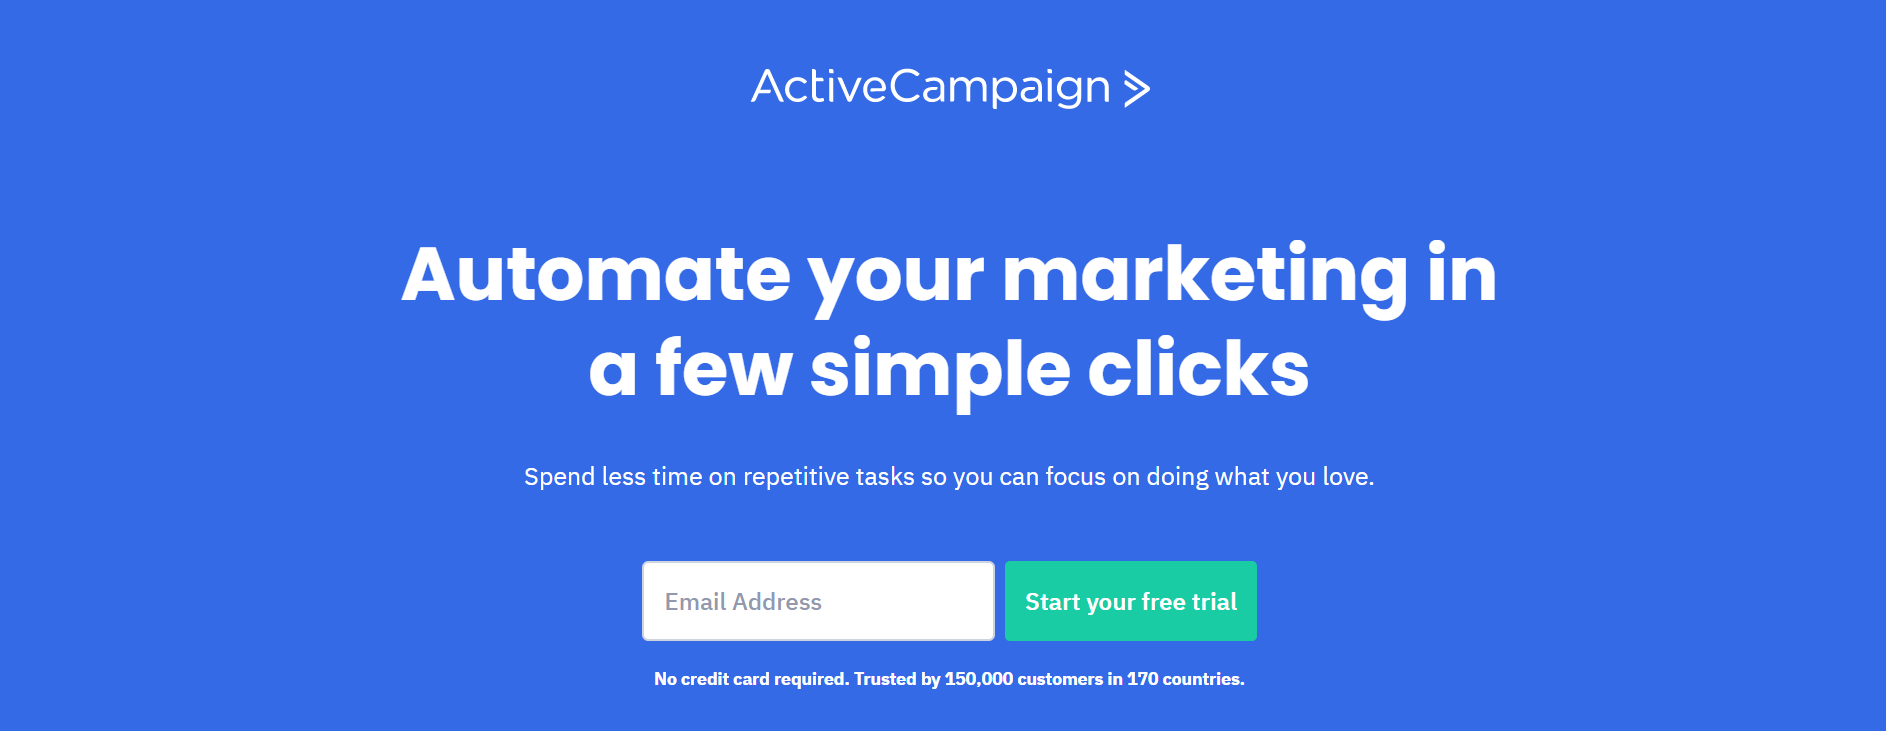 Email Marketing Automation Small Business CRM ActiveCampaign